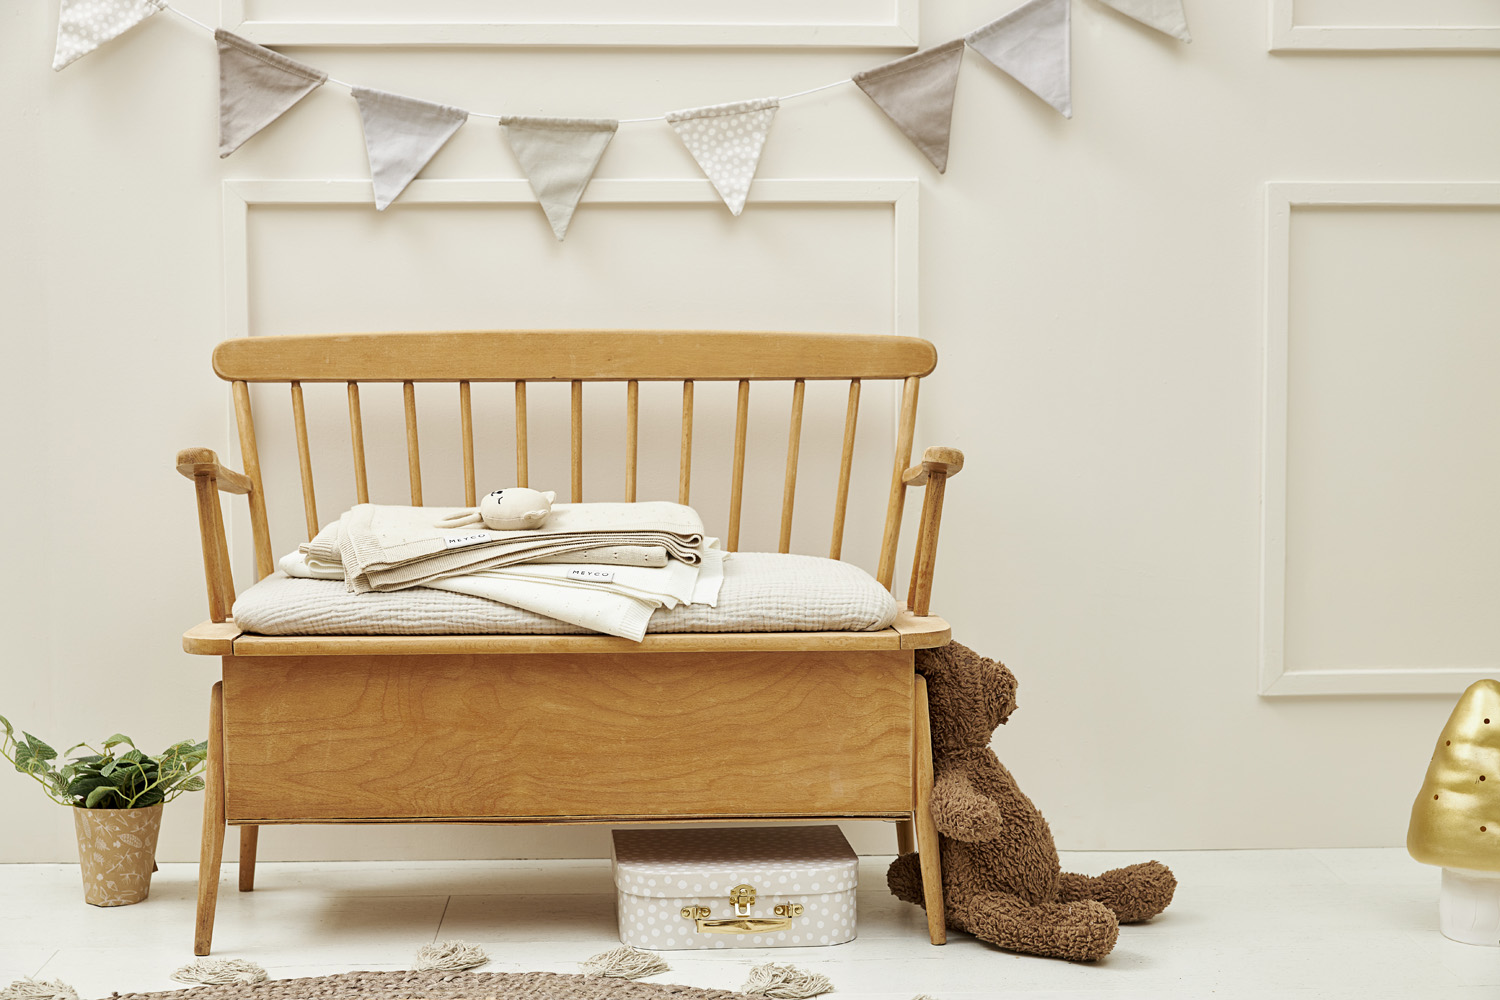 Crib bed blanket bamboo Ajour - offwhite - 75x100cm